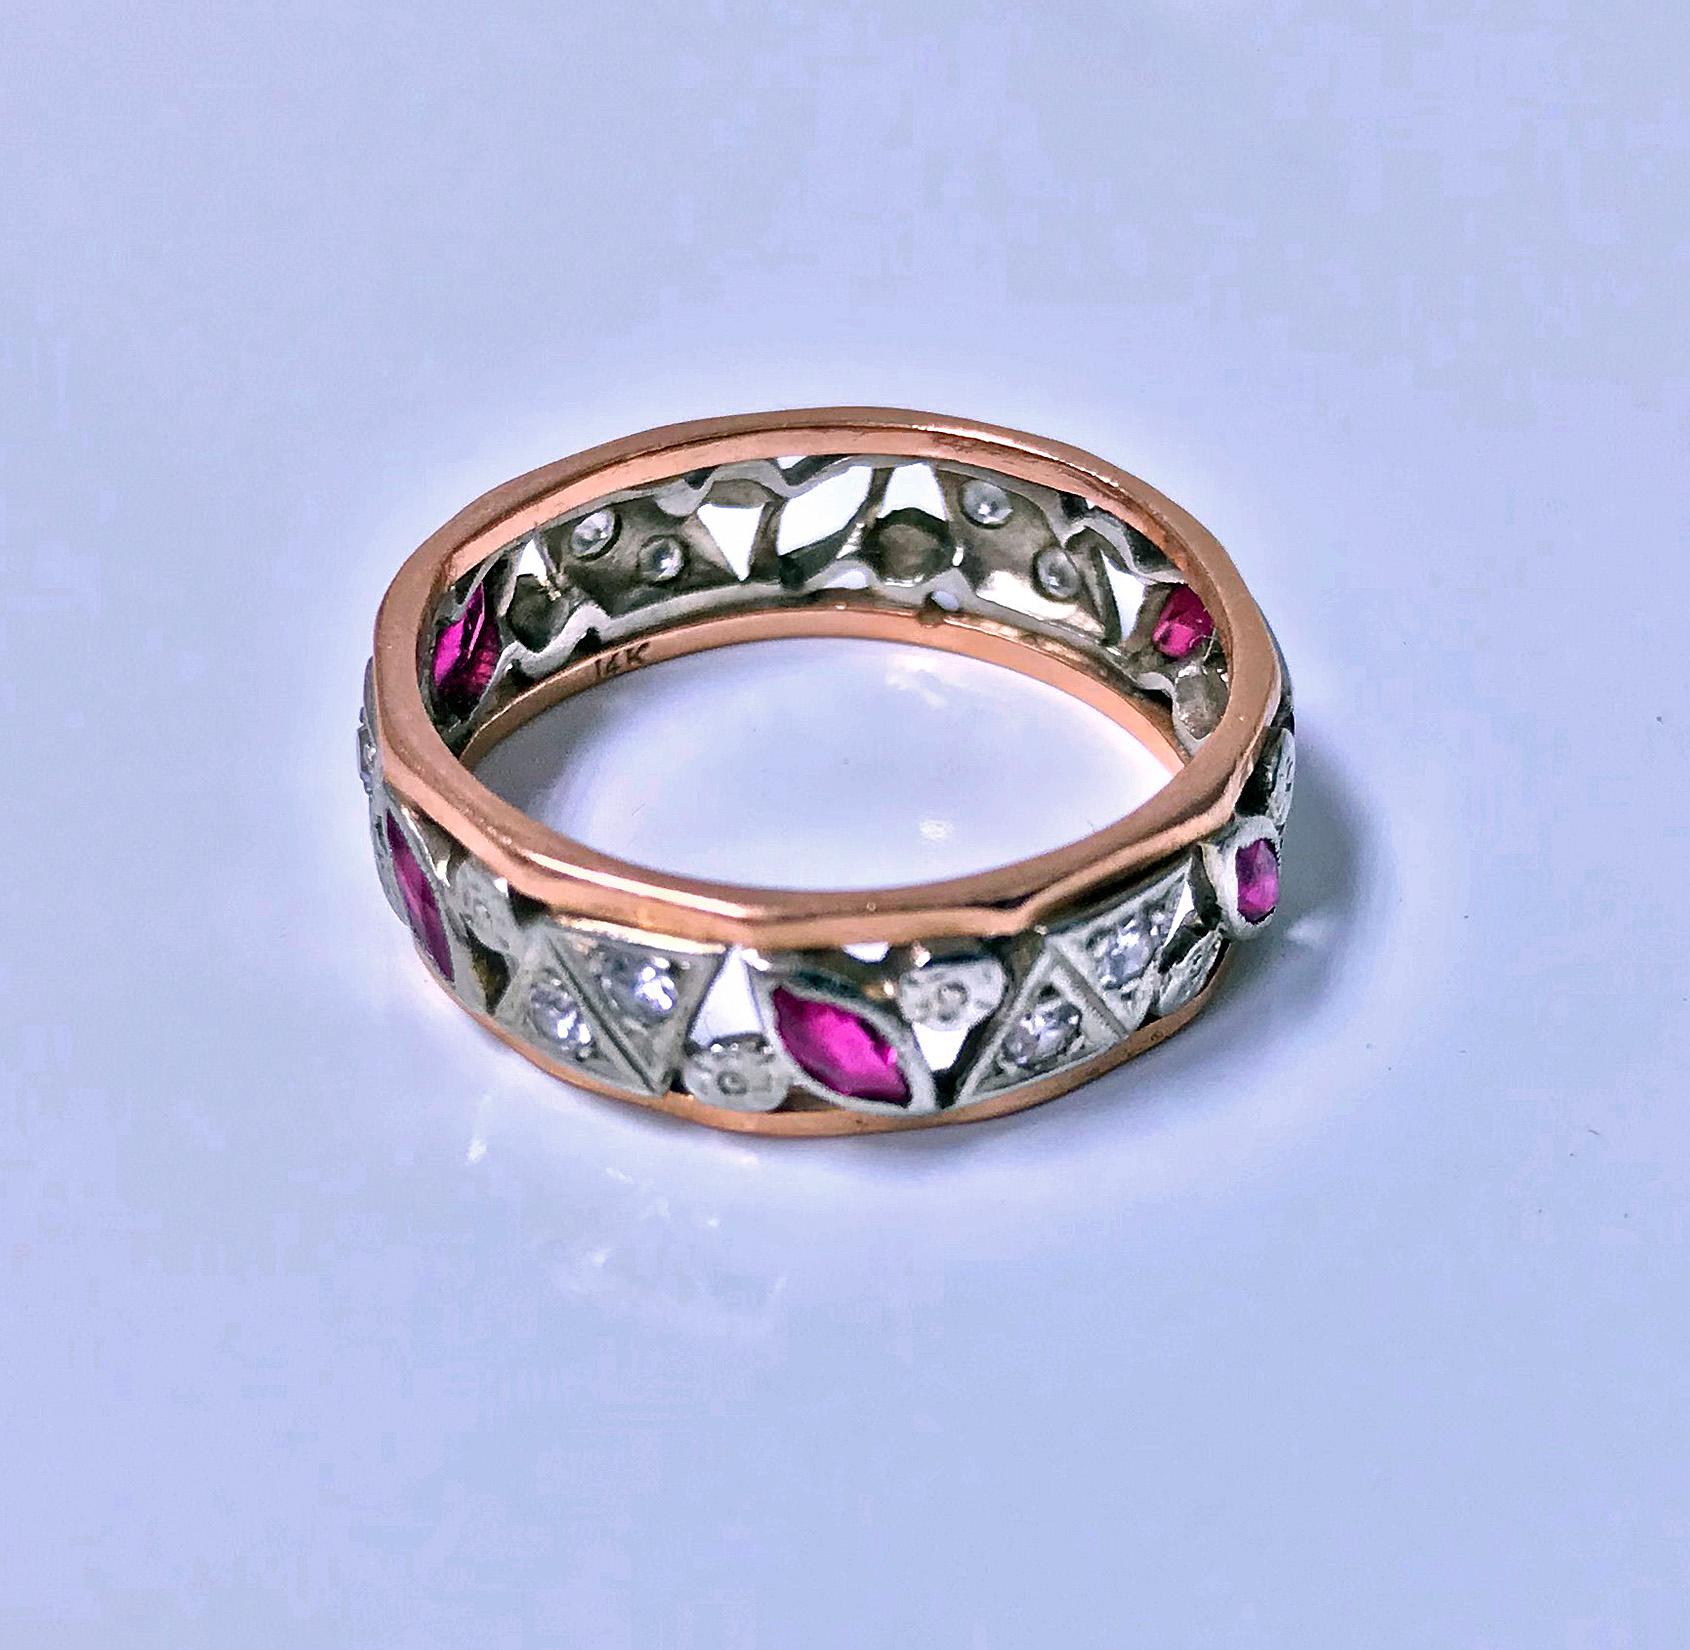 1920's Ruby and Diamond 14K pink and white gold Ring. The Ring of band form with open white gold pierced rosette miilligrain and bezel set small single cut diamonds and marquise rubies between solid pink gold border surrounds. Stamped 14K on